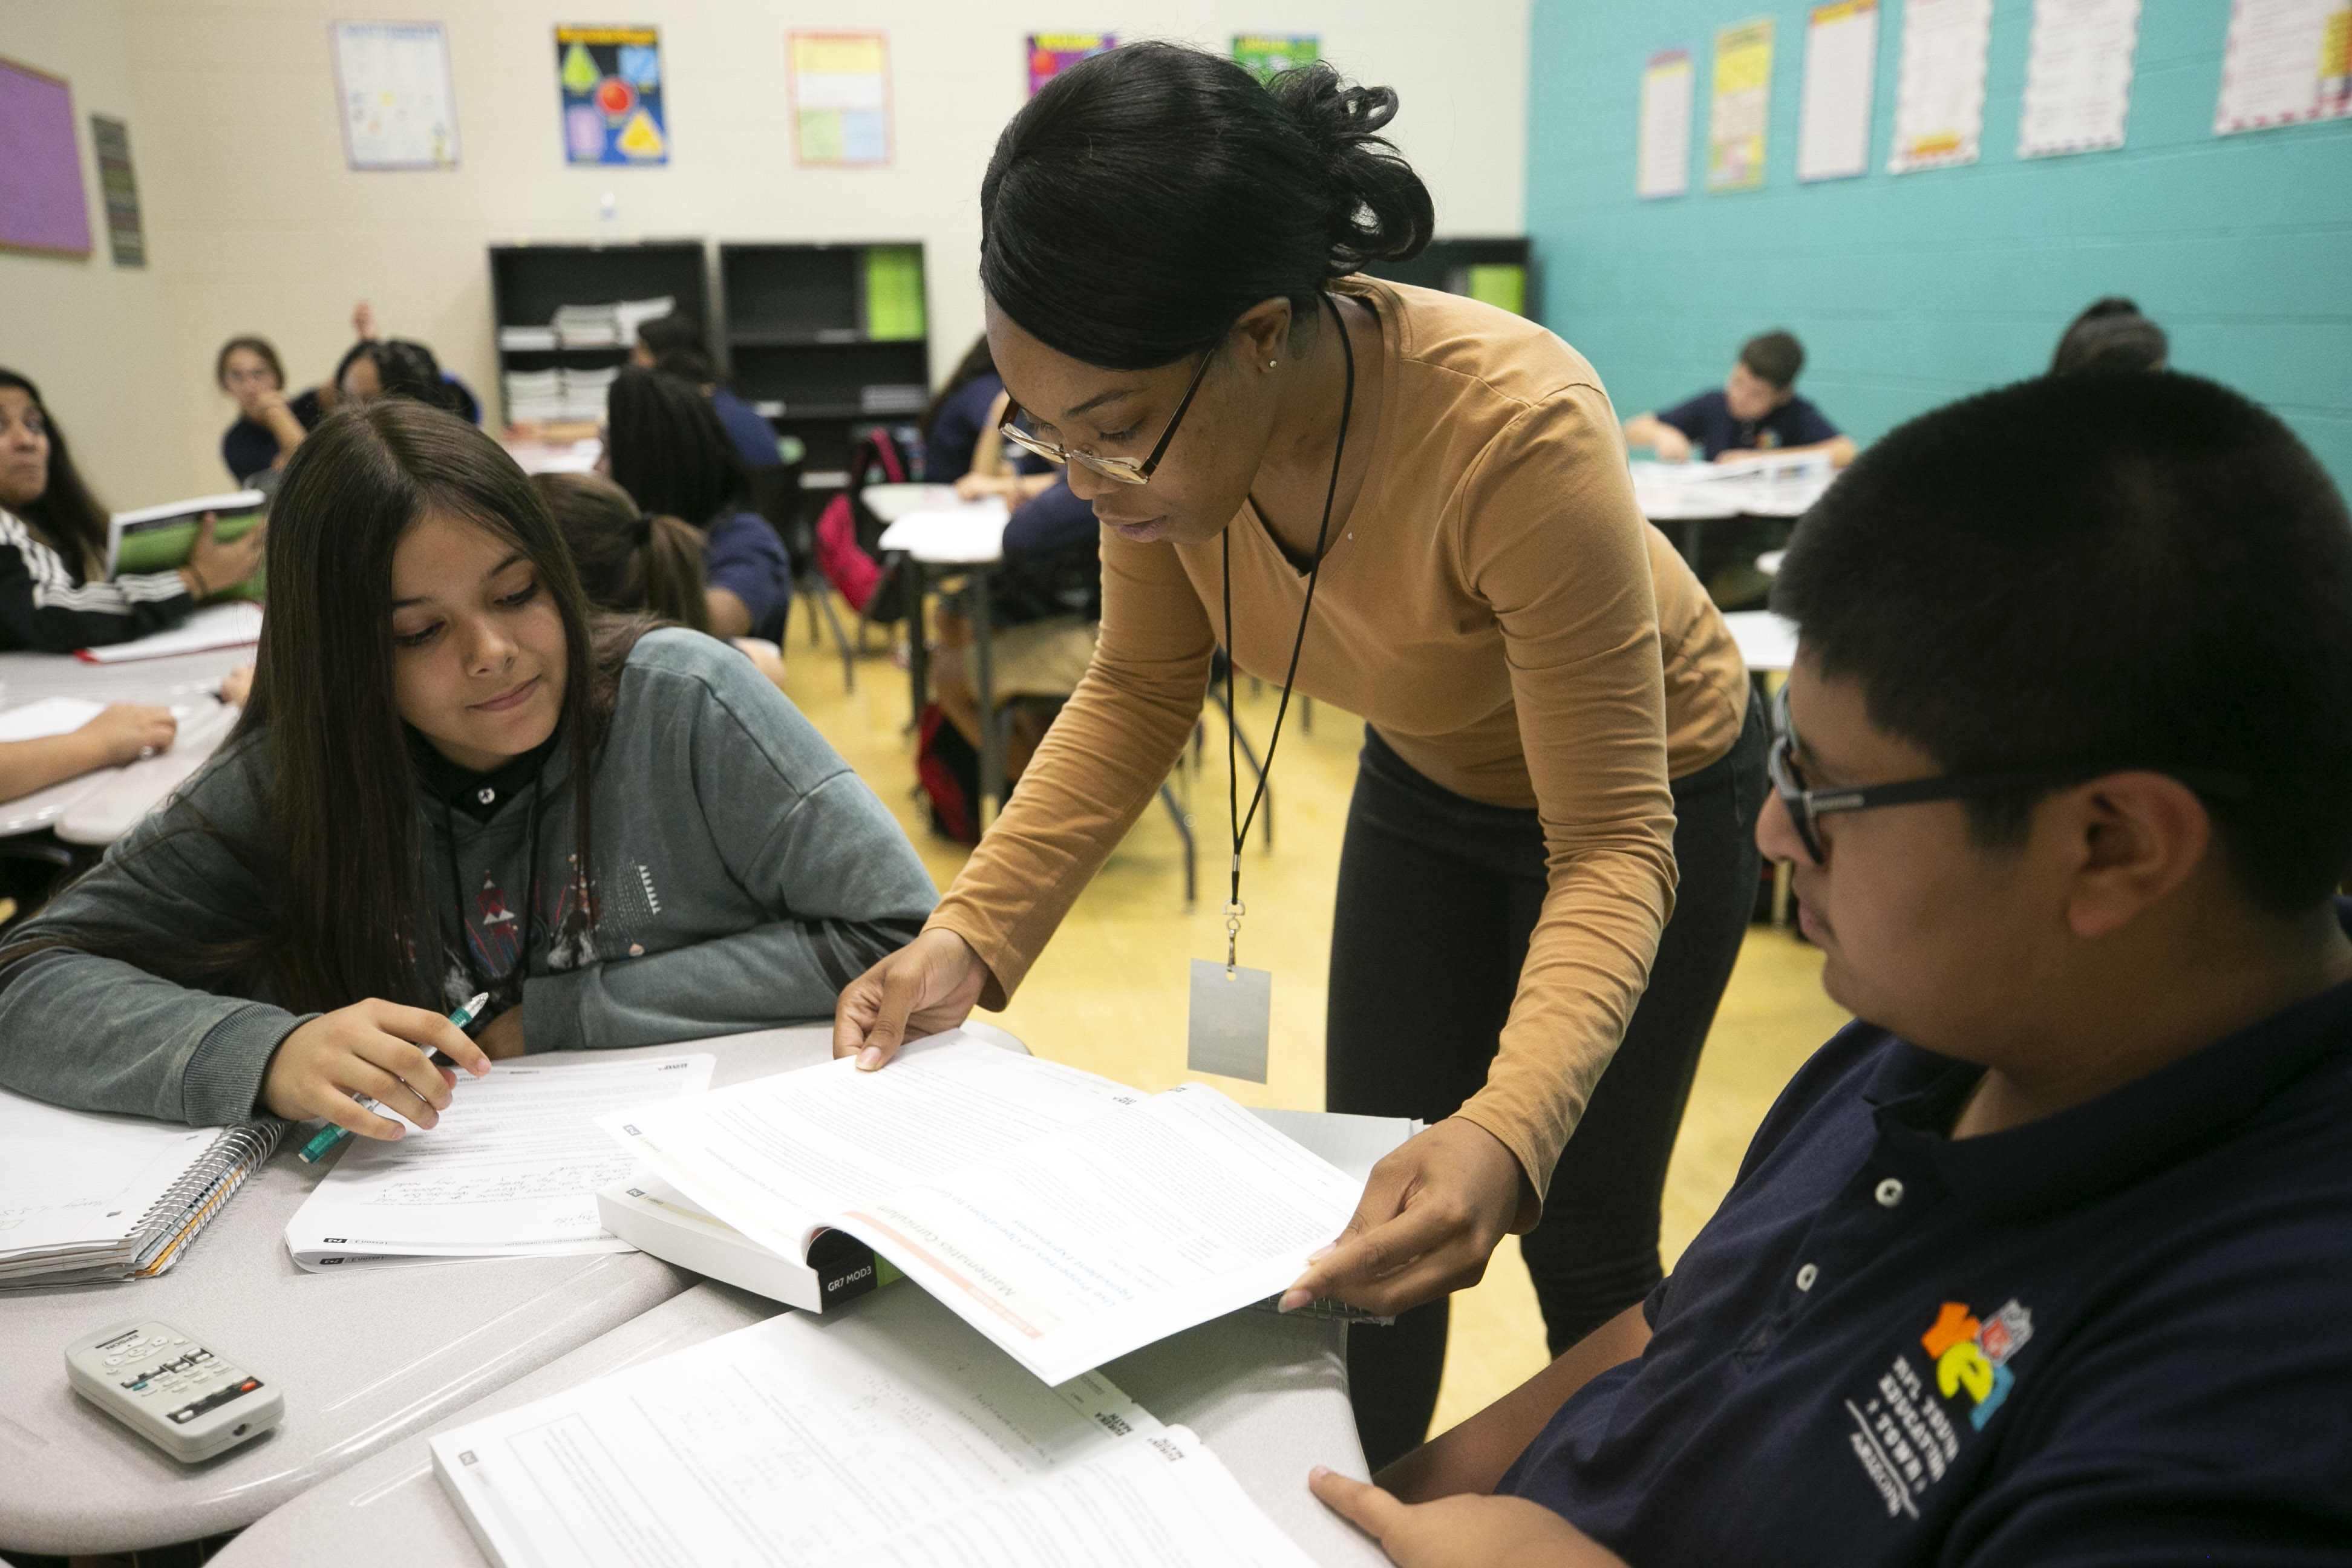 Charter school 101: Common questions about Arizona's charters answered